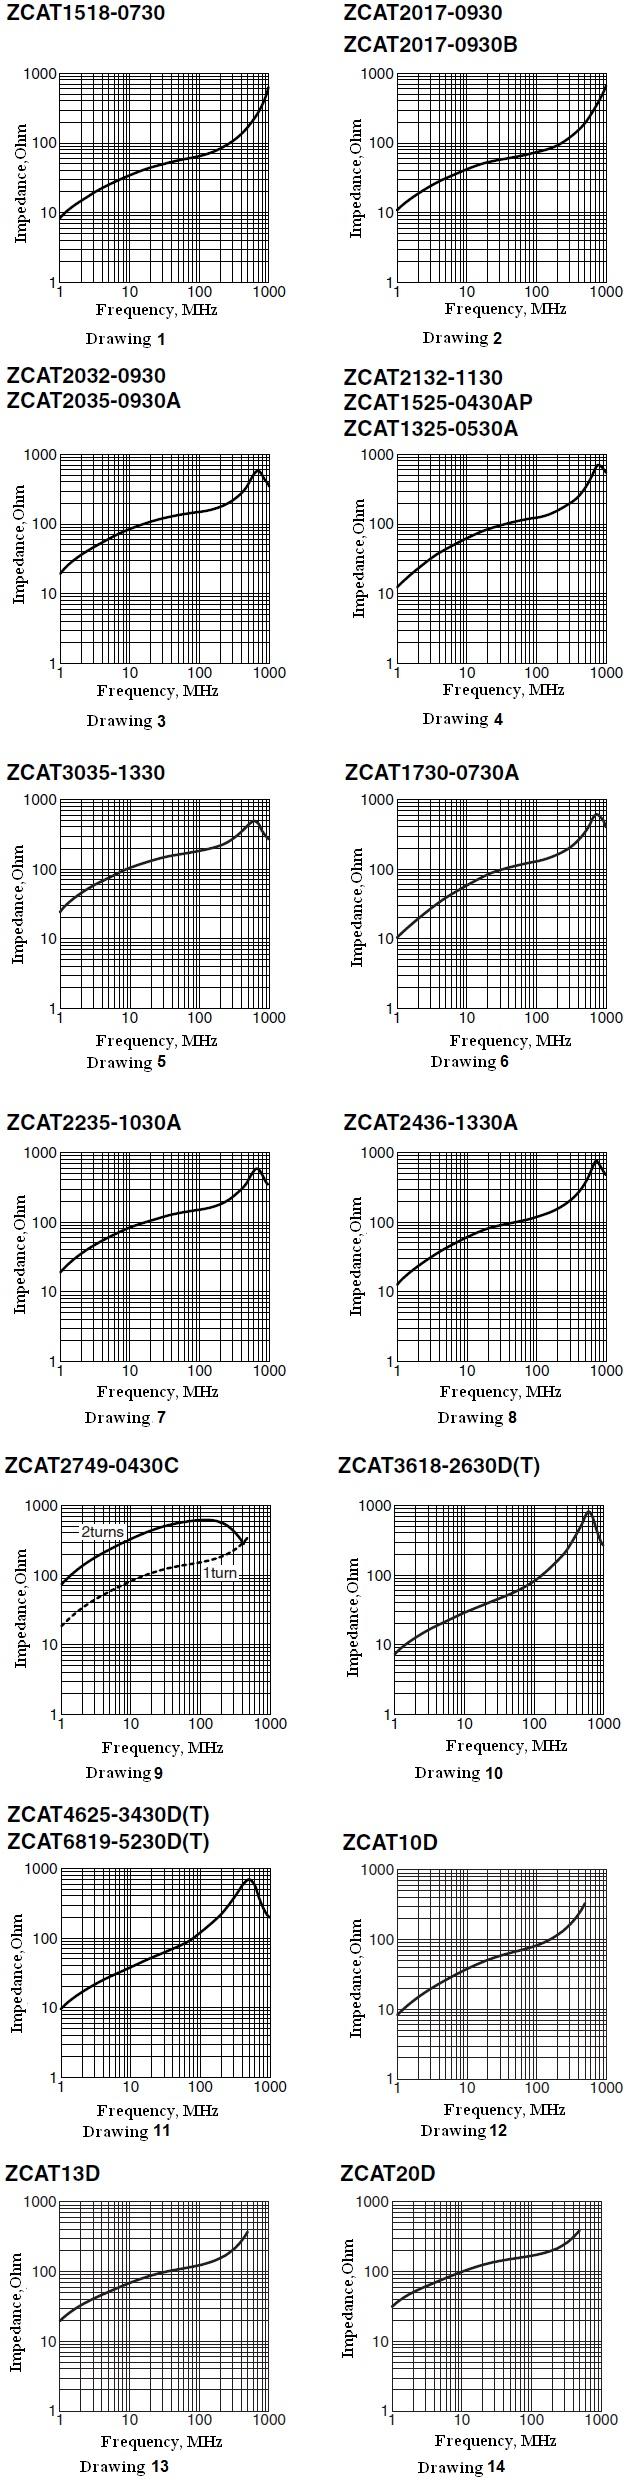 impedance vs frequency